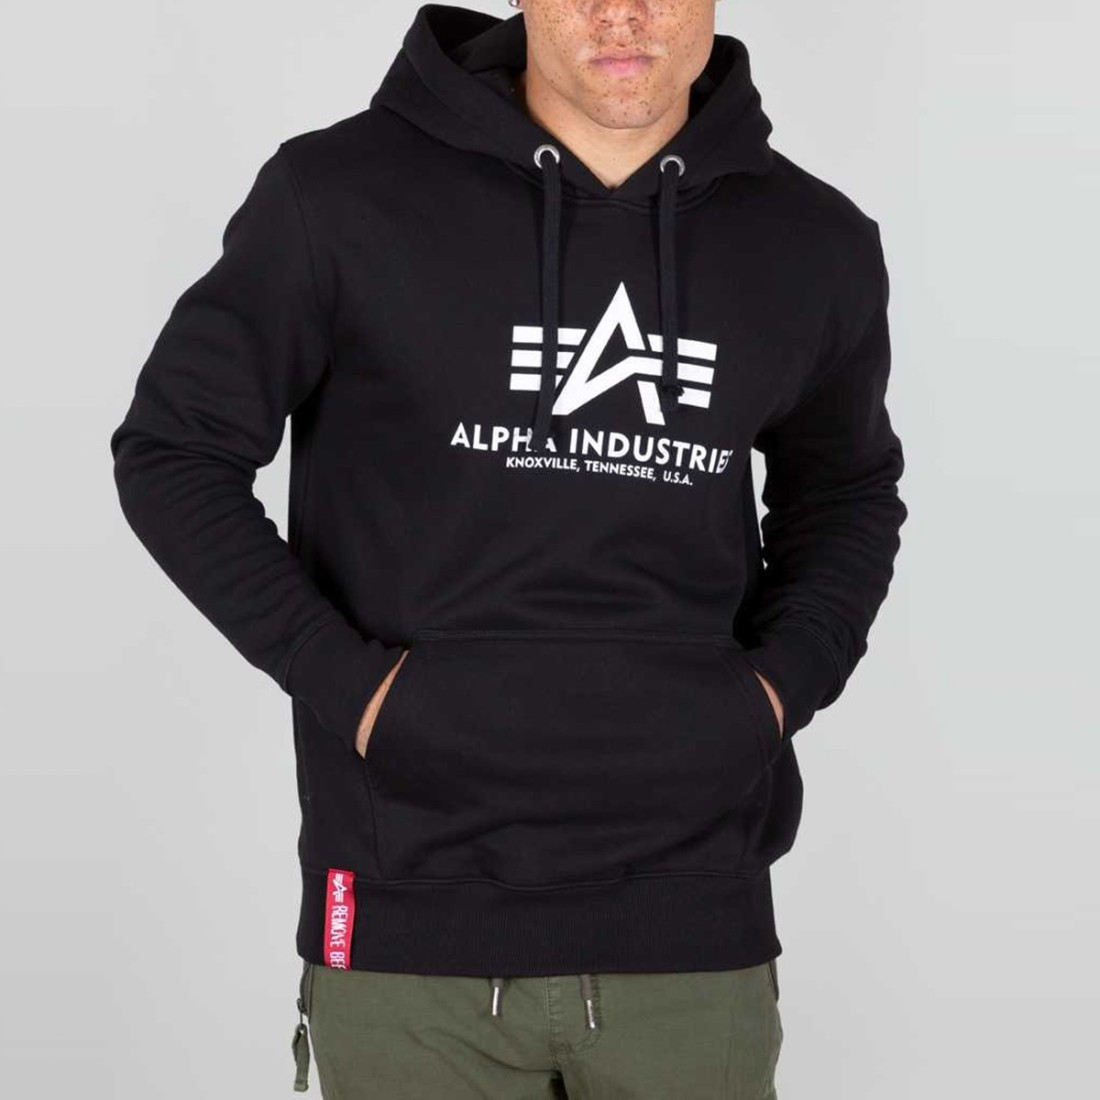 Alpha Industries Hoodies: Style and Comfort in an Iconic Piece